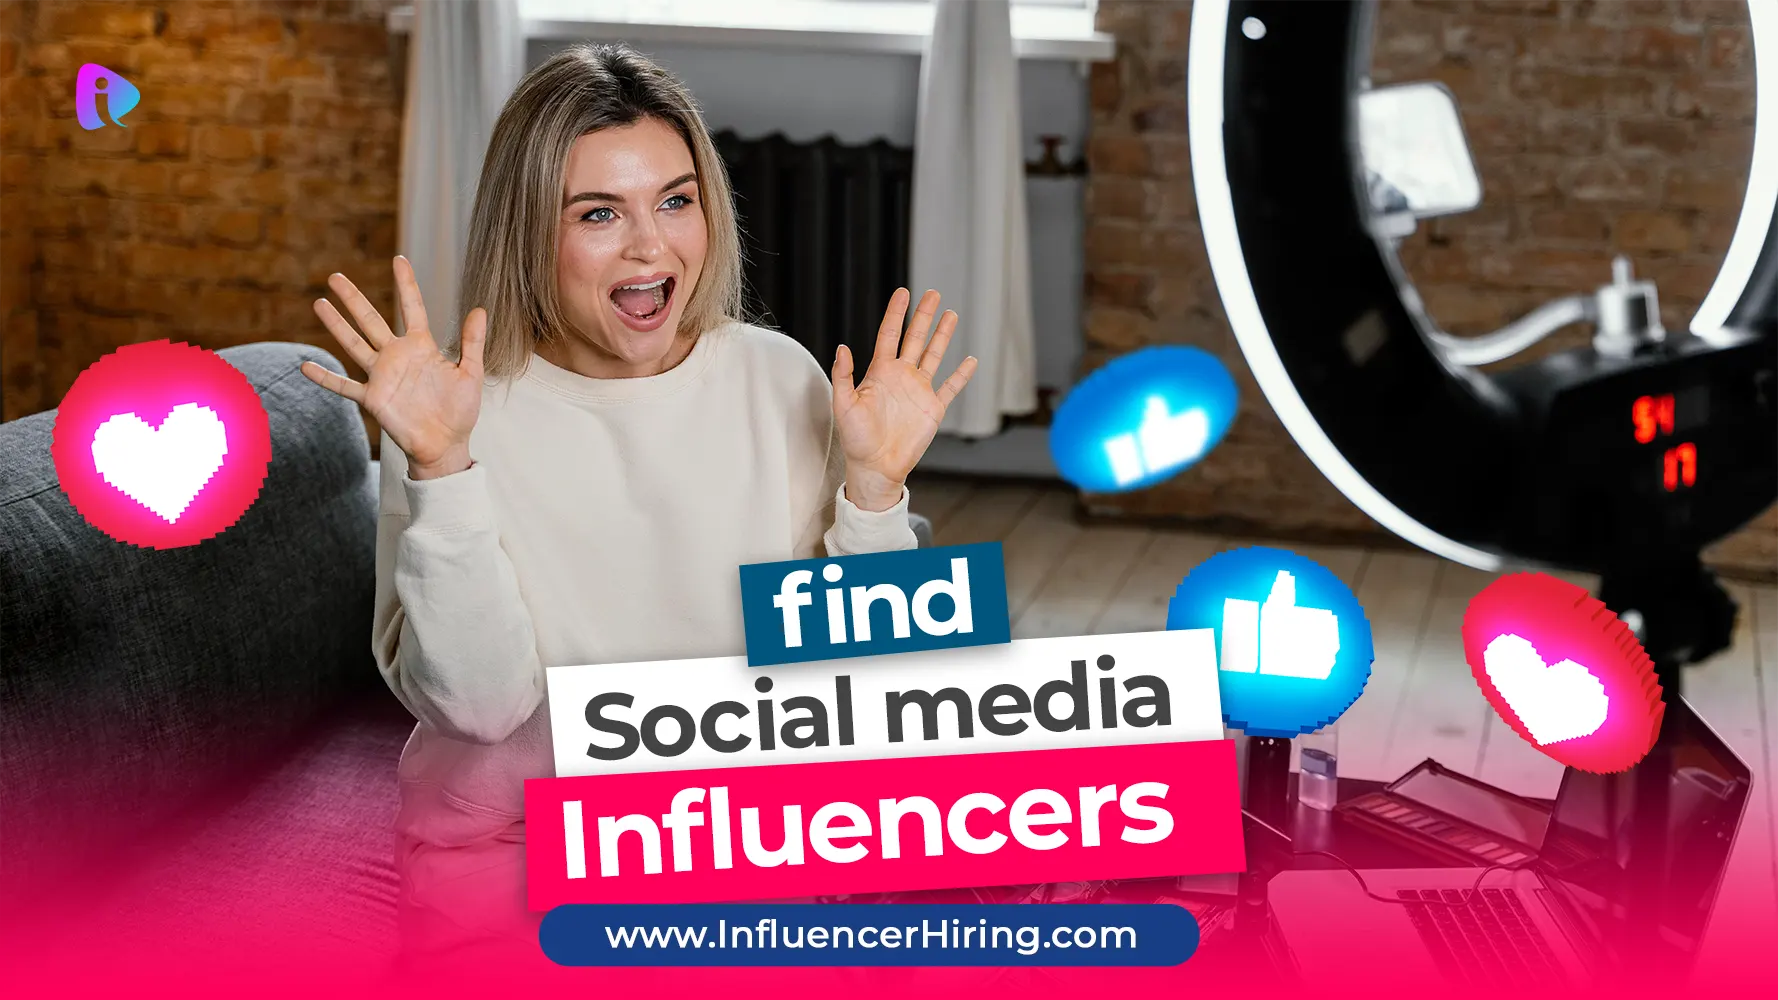 Graphic showing steps for finding the right social media influencers,